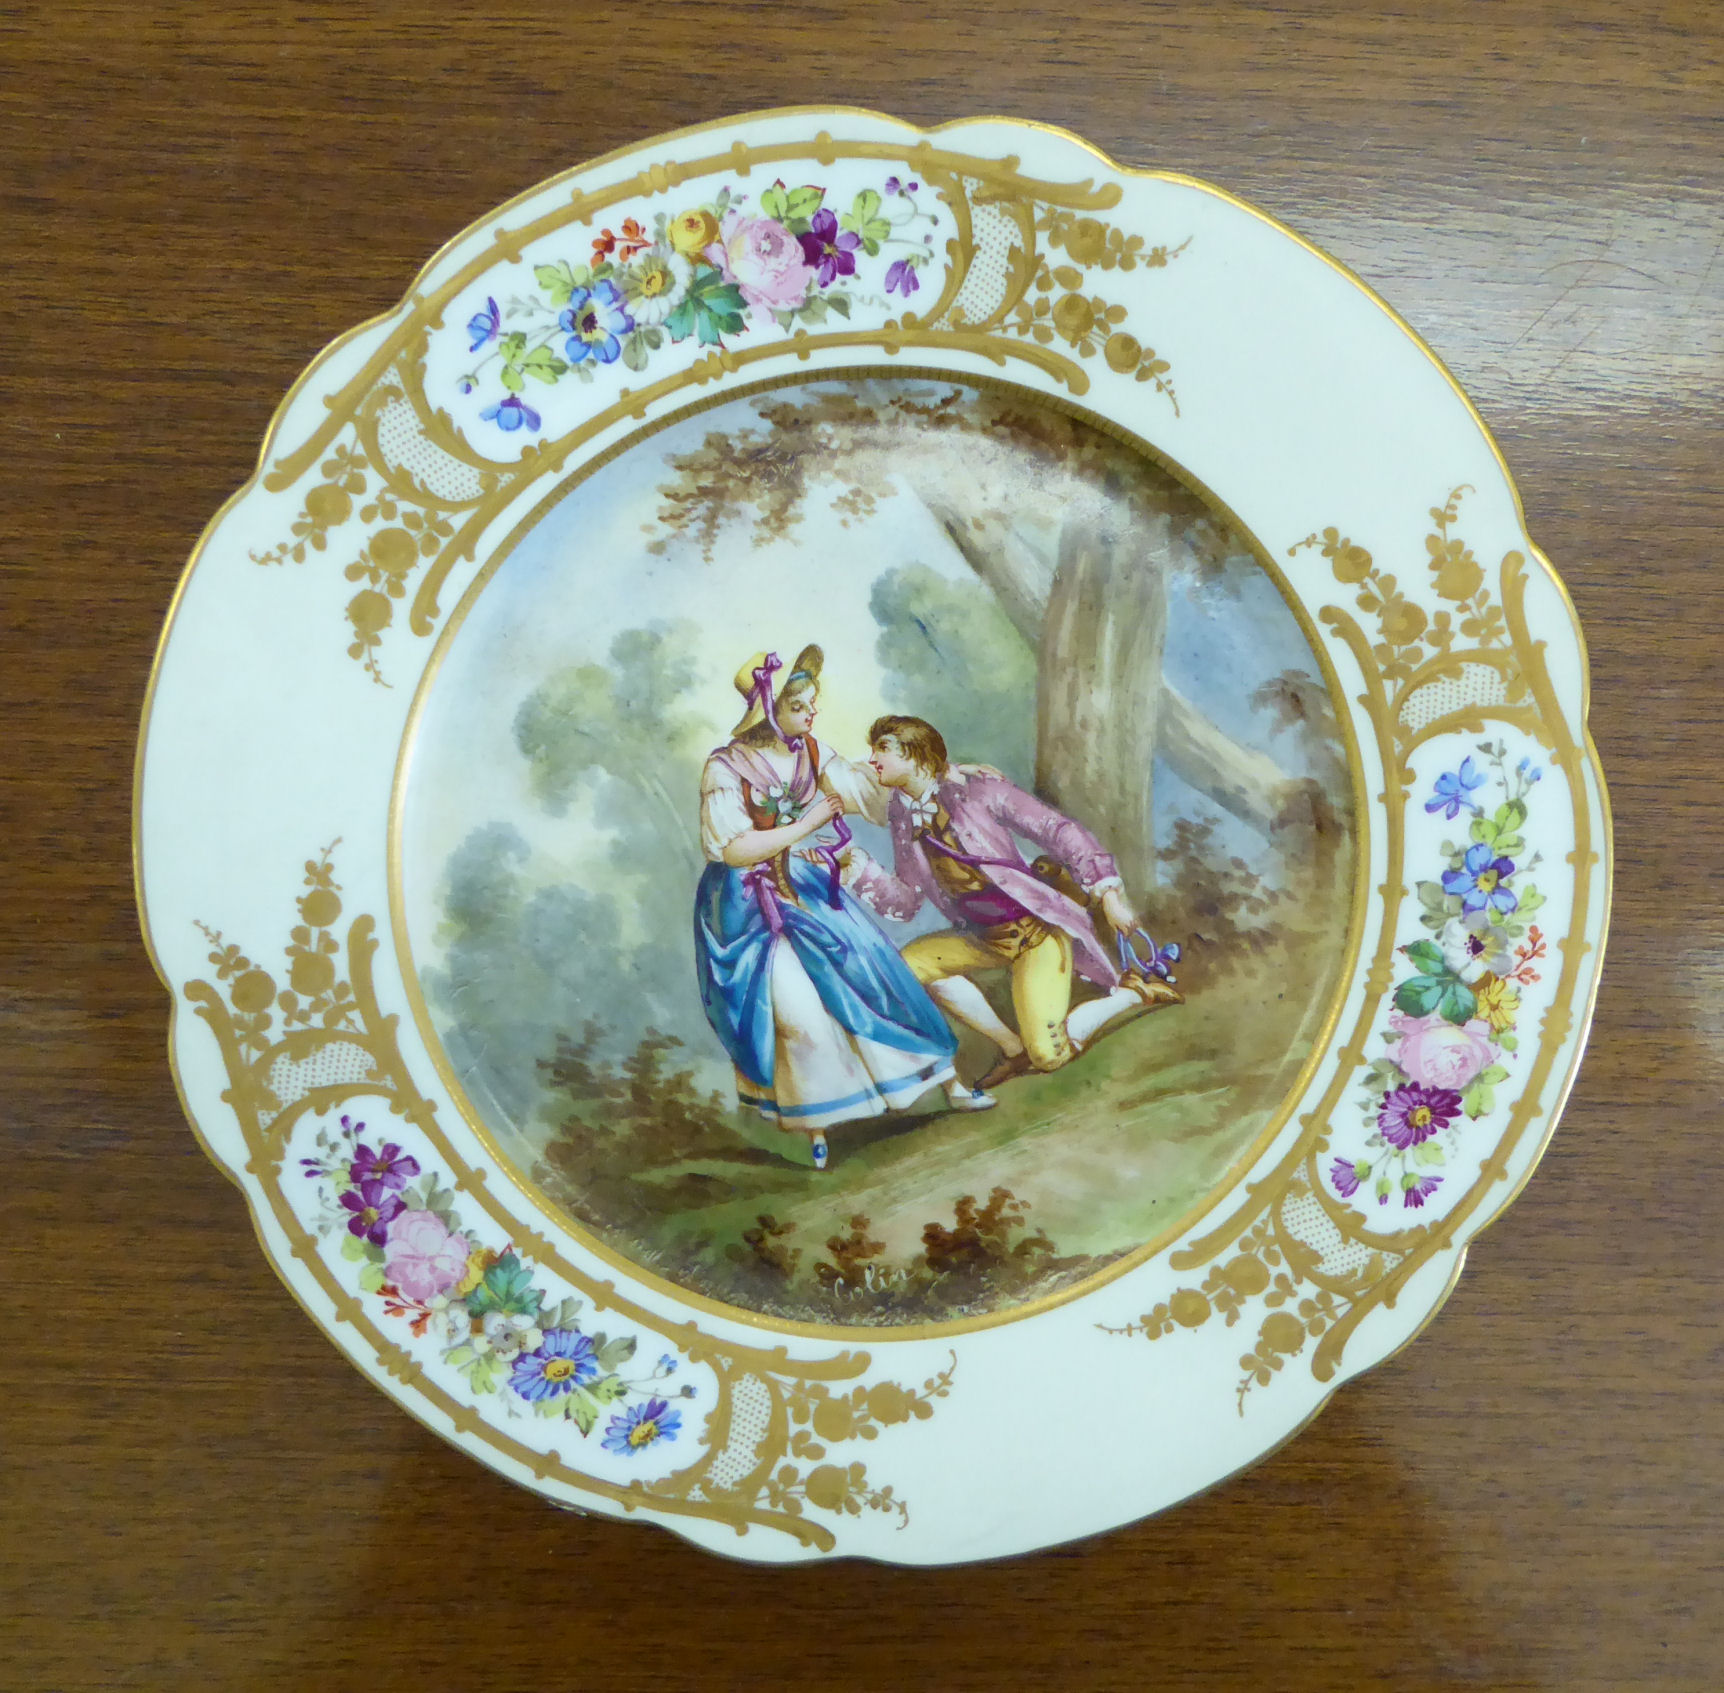 A mid 19thC Sevres porcelain wavy edge plate, featuring a romantic scene,